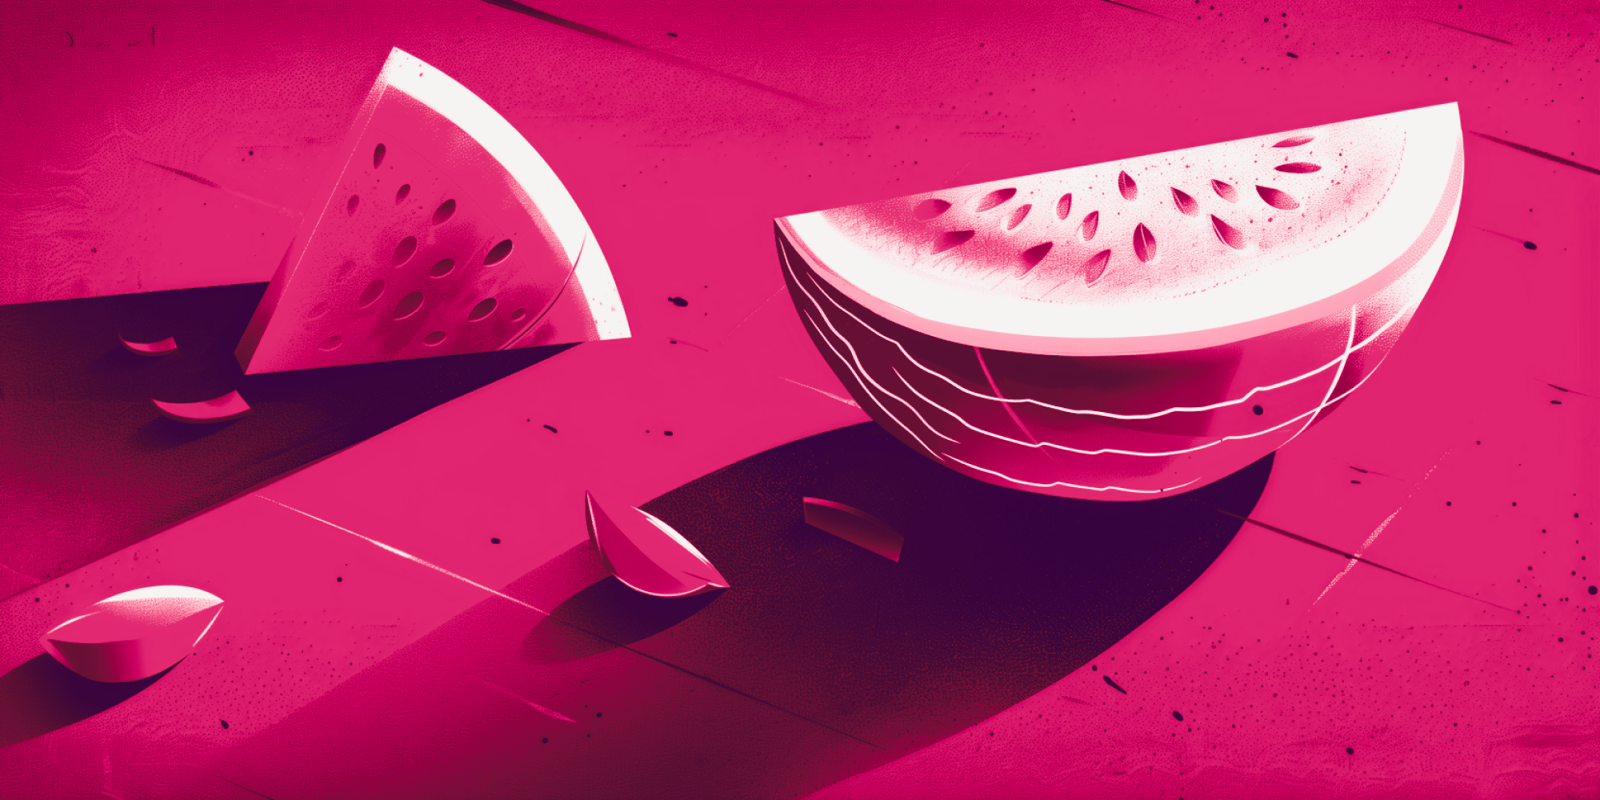 The story of a mould, a melon and a war